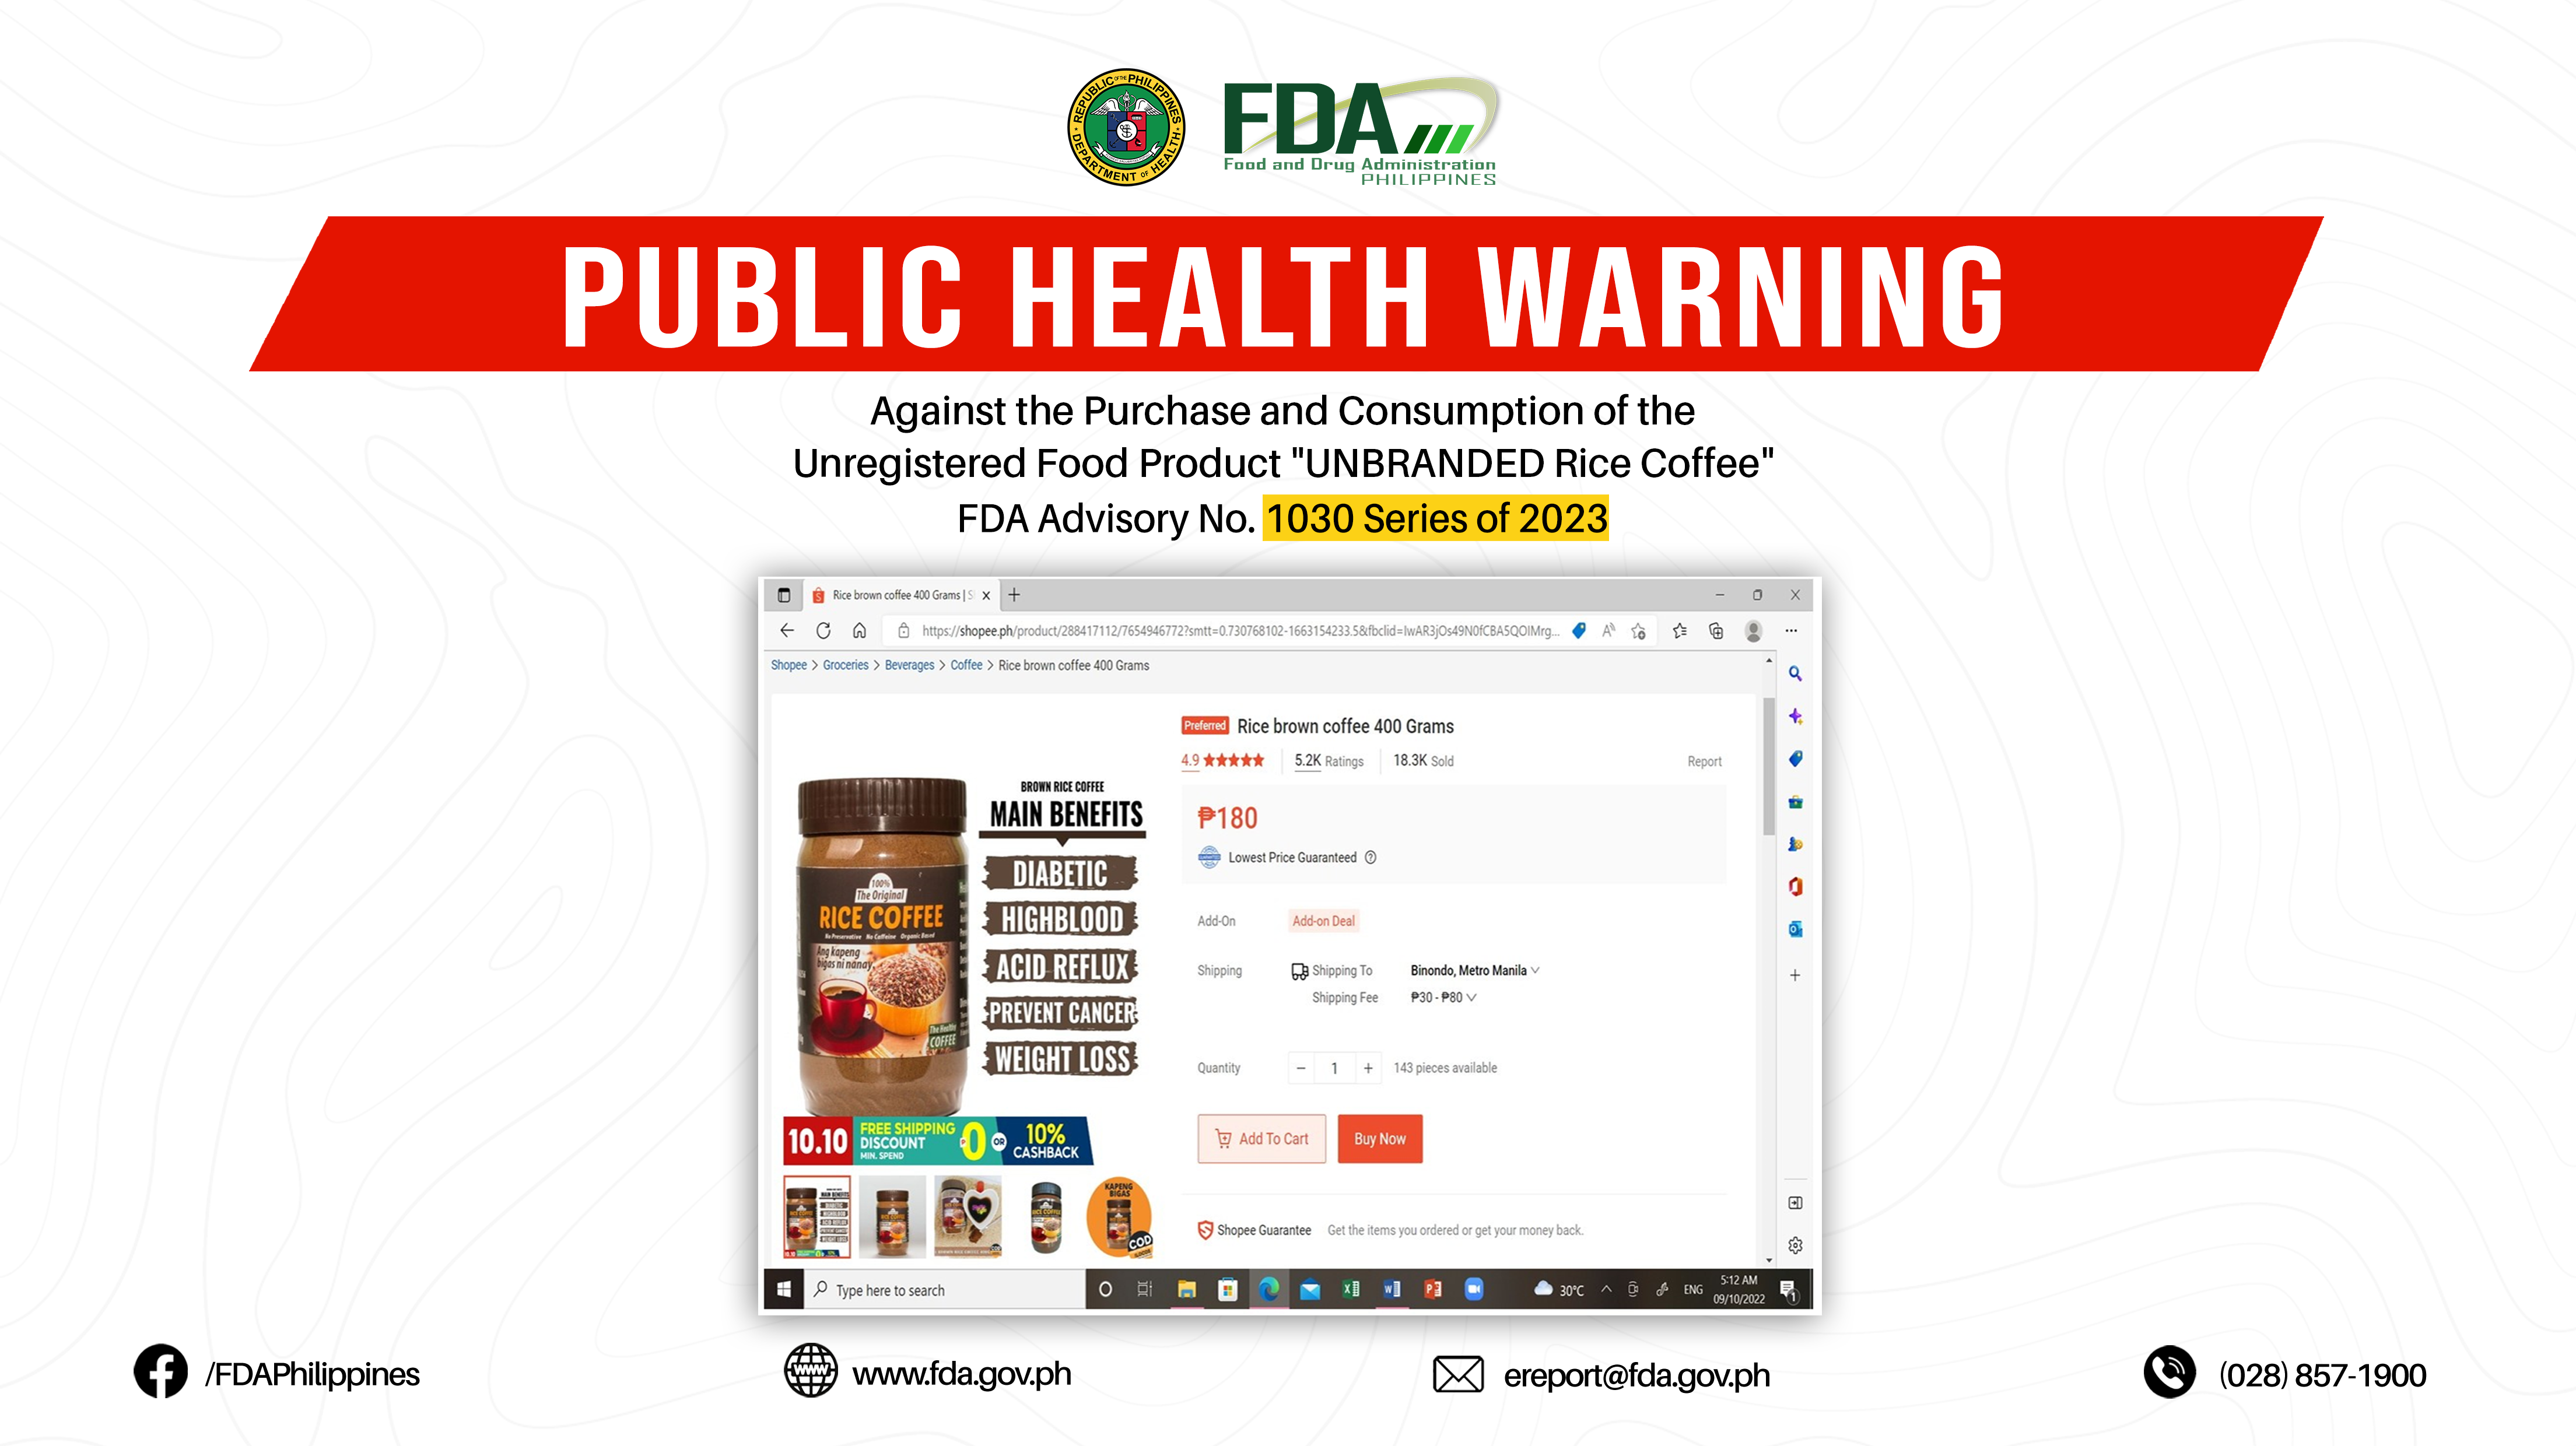 FDA Advisory No.2023-1030 || Public Health Warning Against the Purchase and Consumption of the Unregistered Food Product “UNBRANDED Rice Coffee”